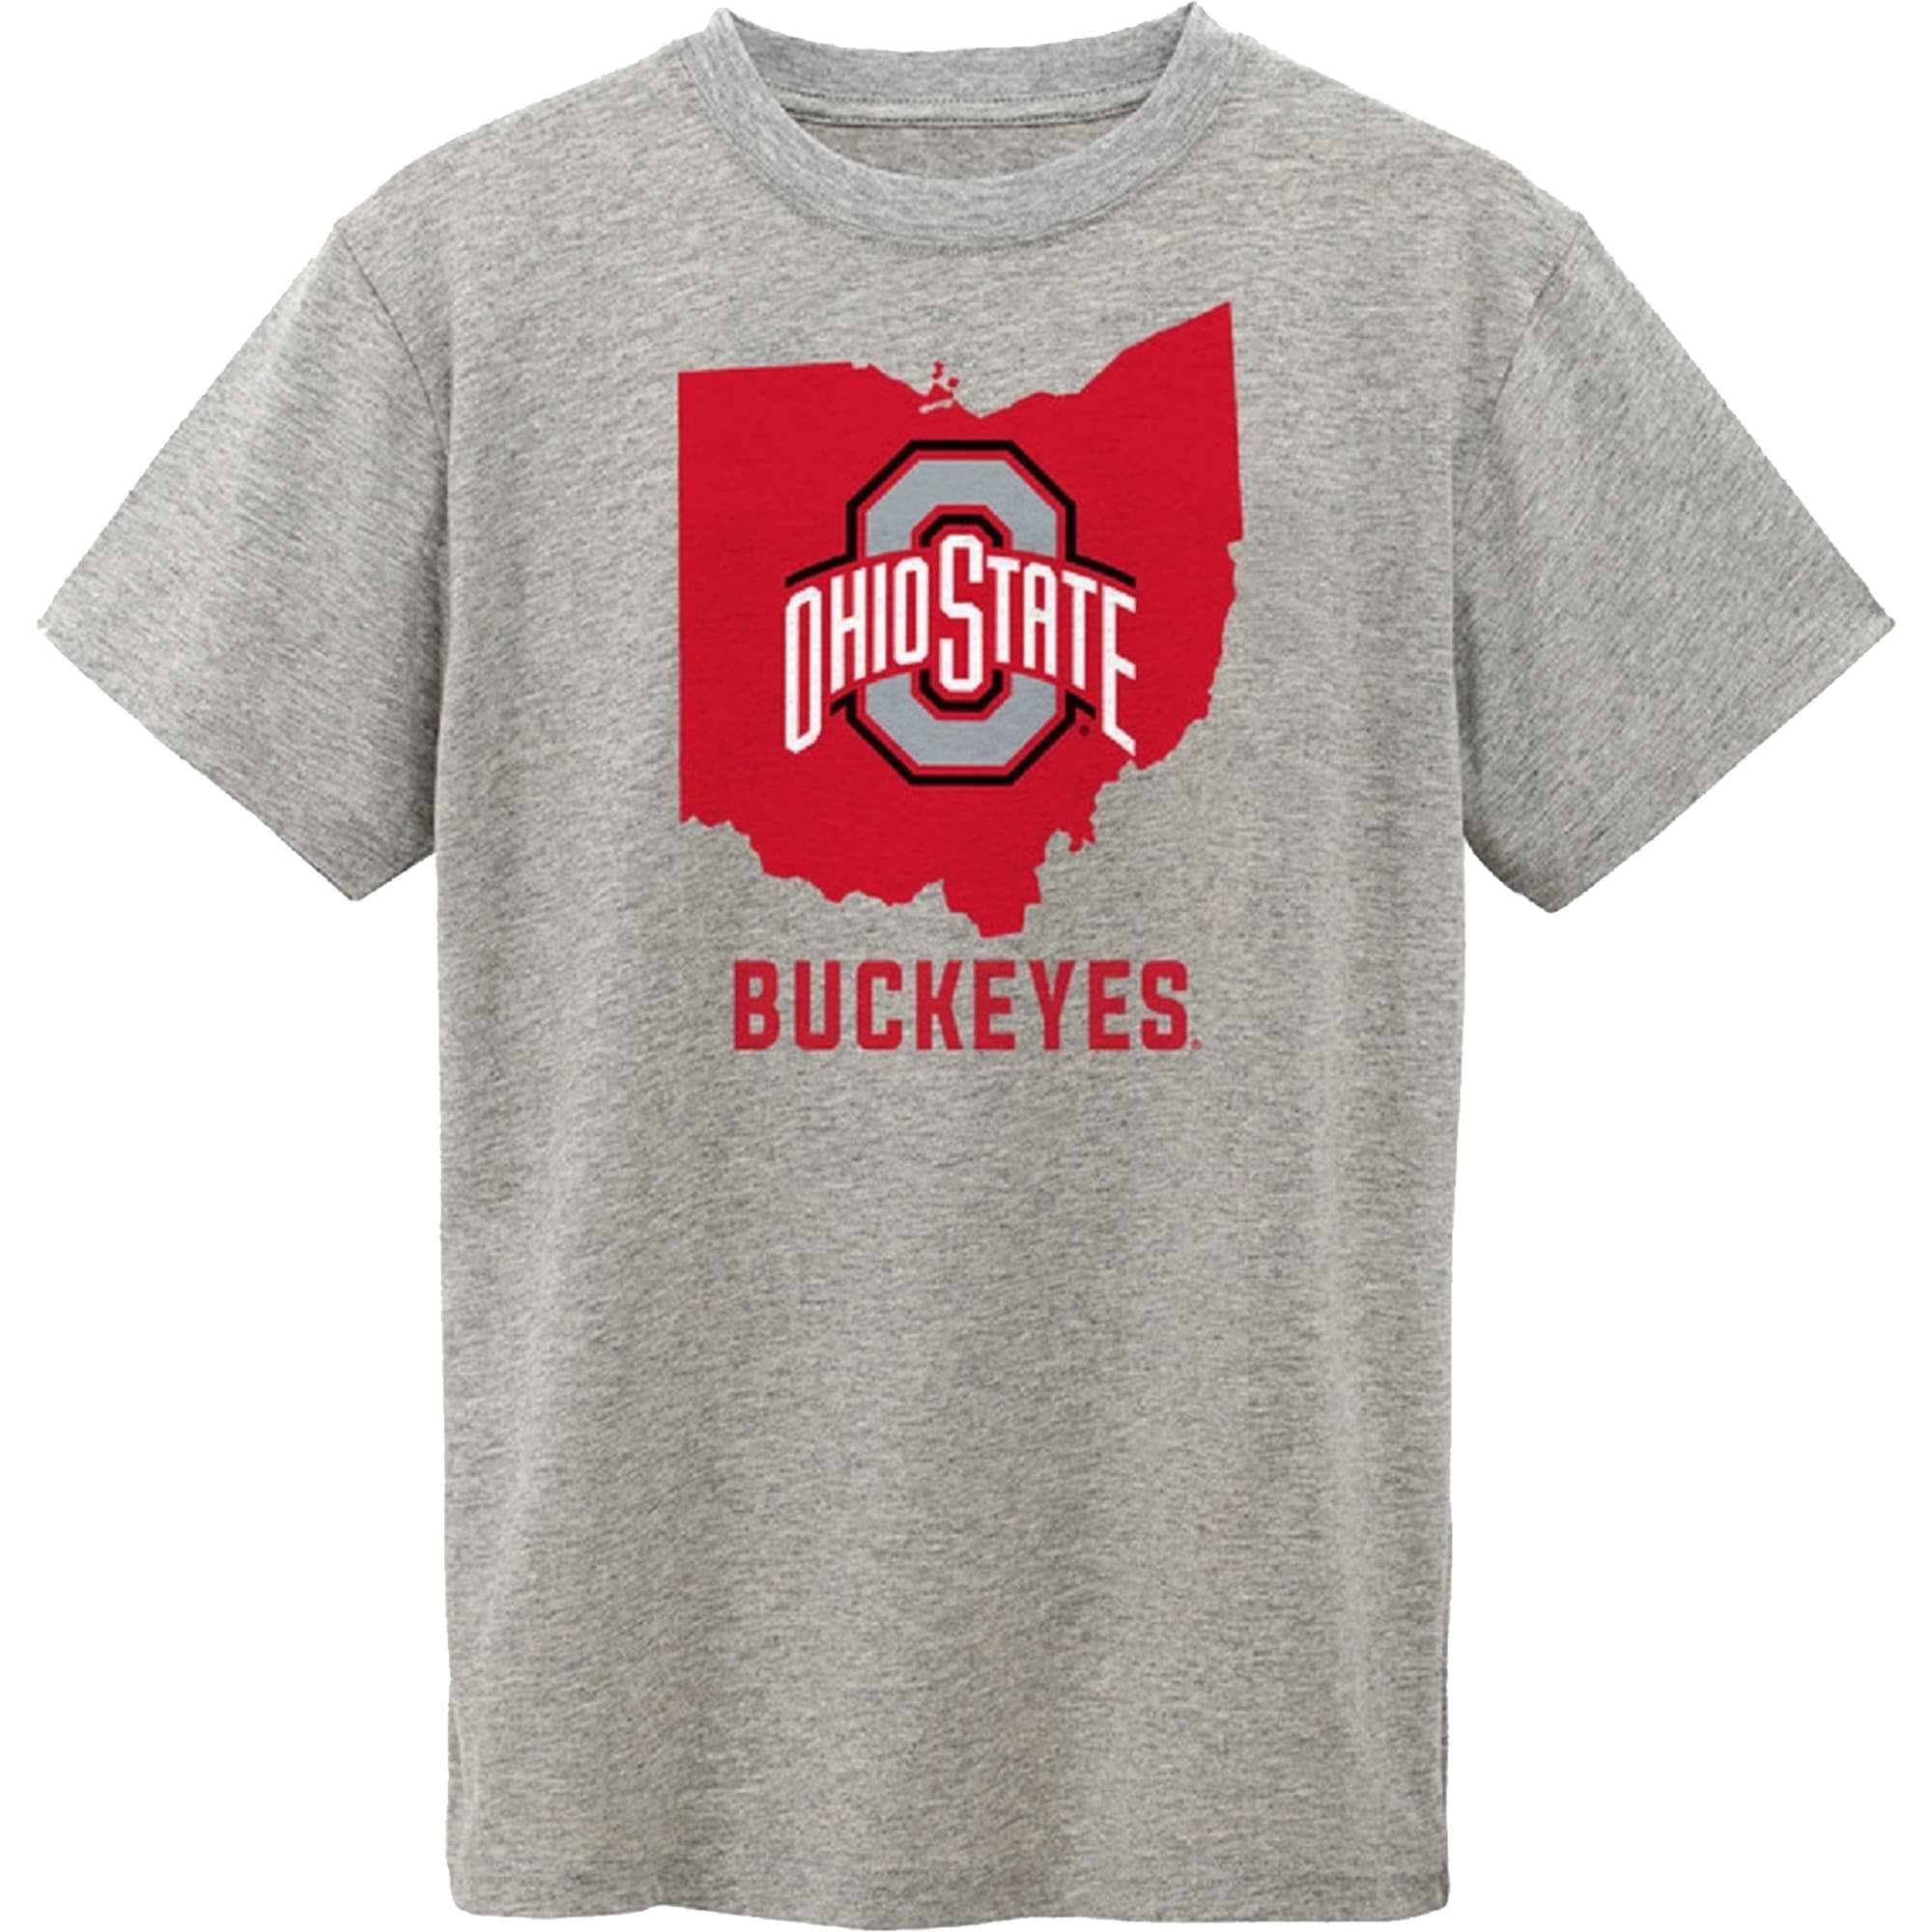 Buckeyes Against The World Championship Shirt Choose Color Size S/M/L/XL/XXL 